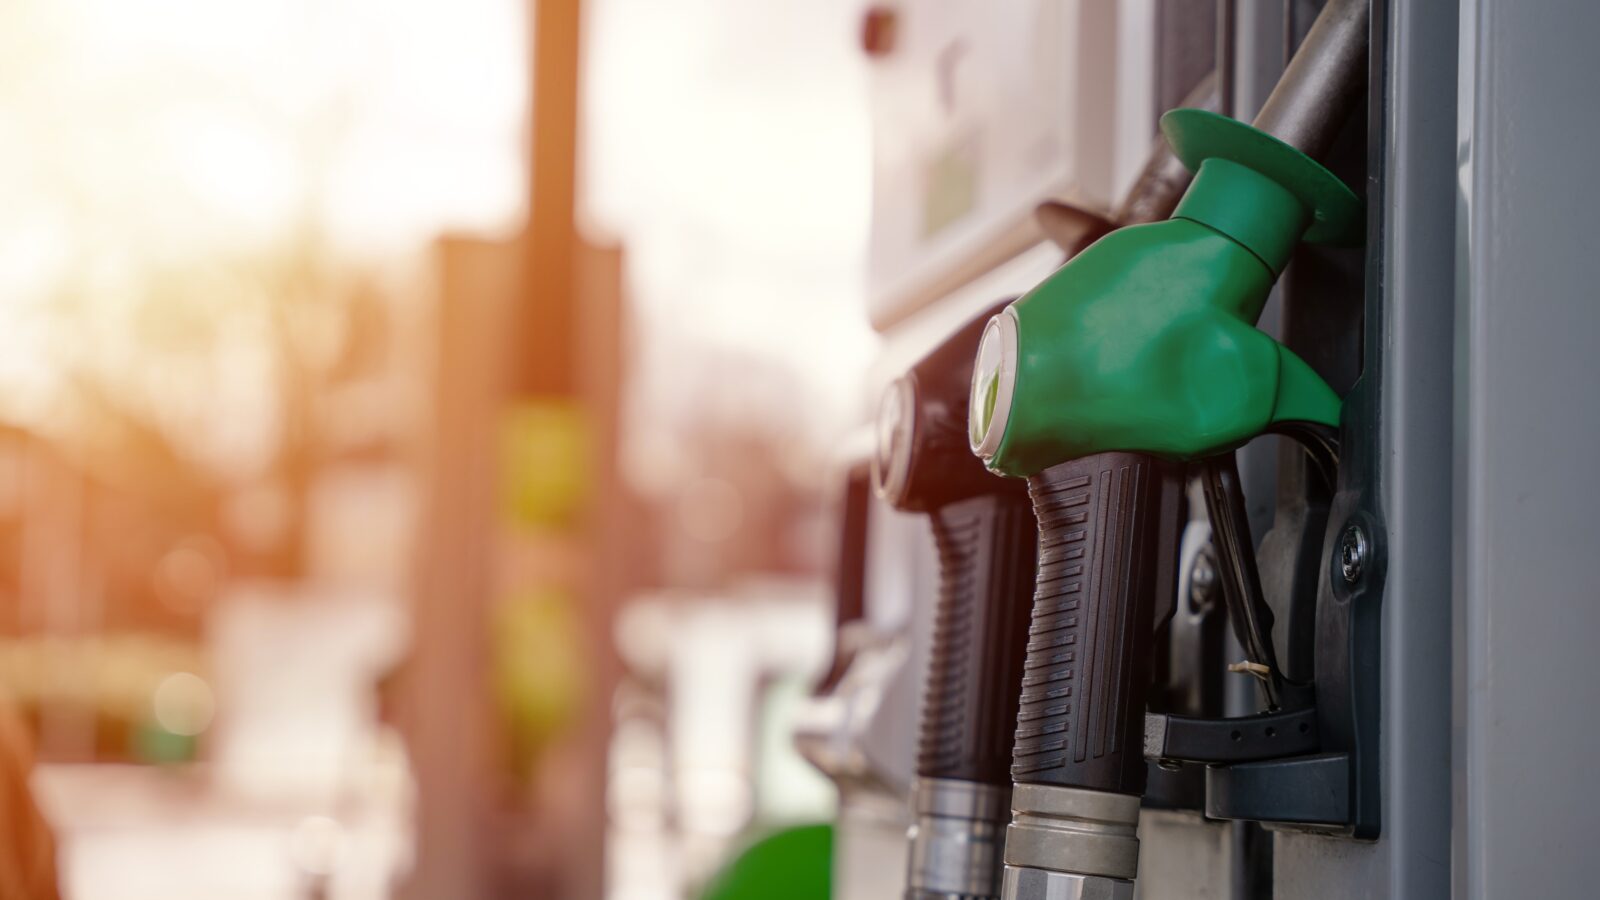 Morrisons completes sale of petrol forecourts